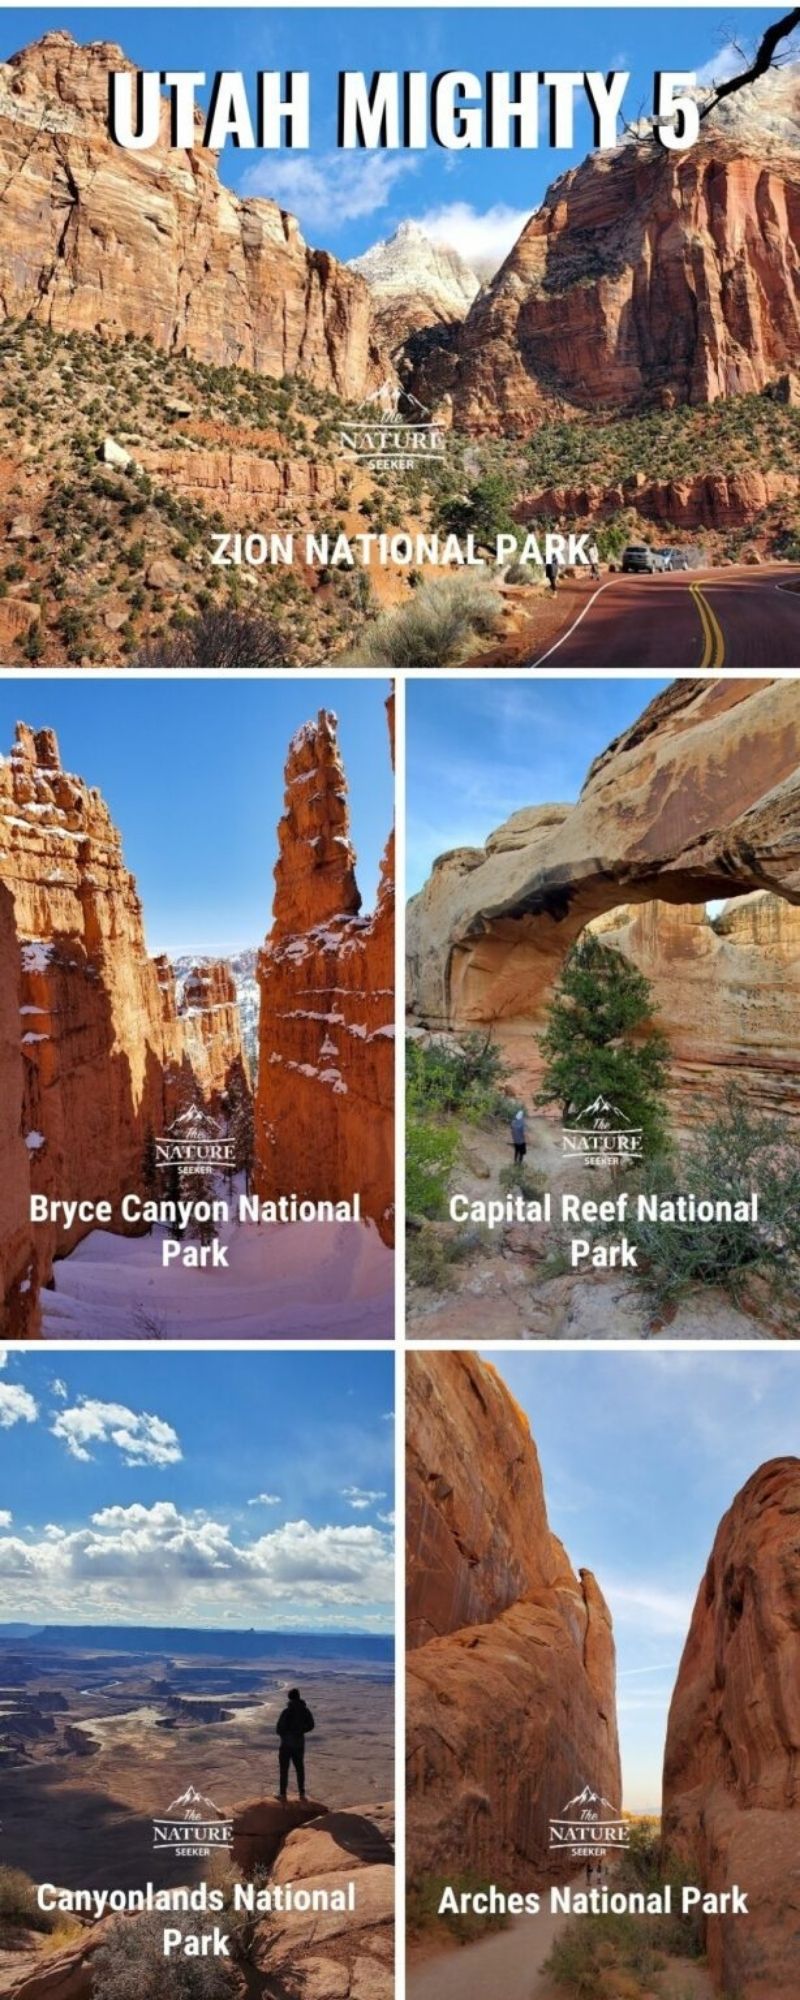 utah mighty 5 national parks infographic 01